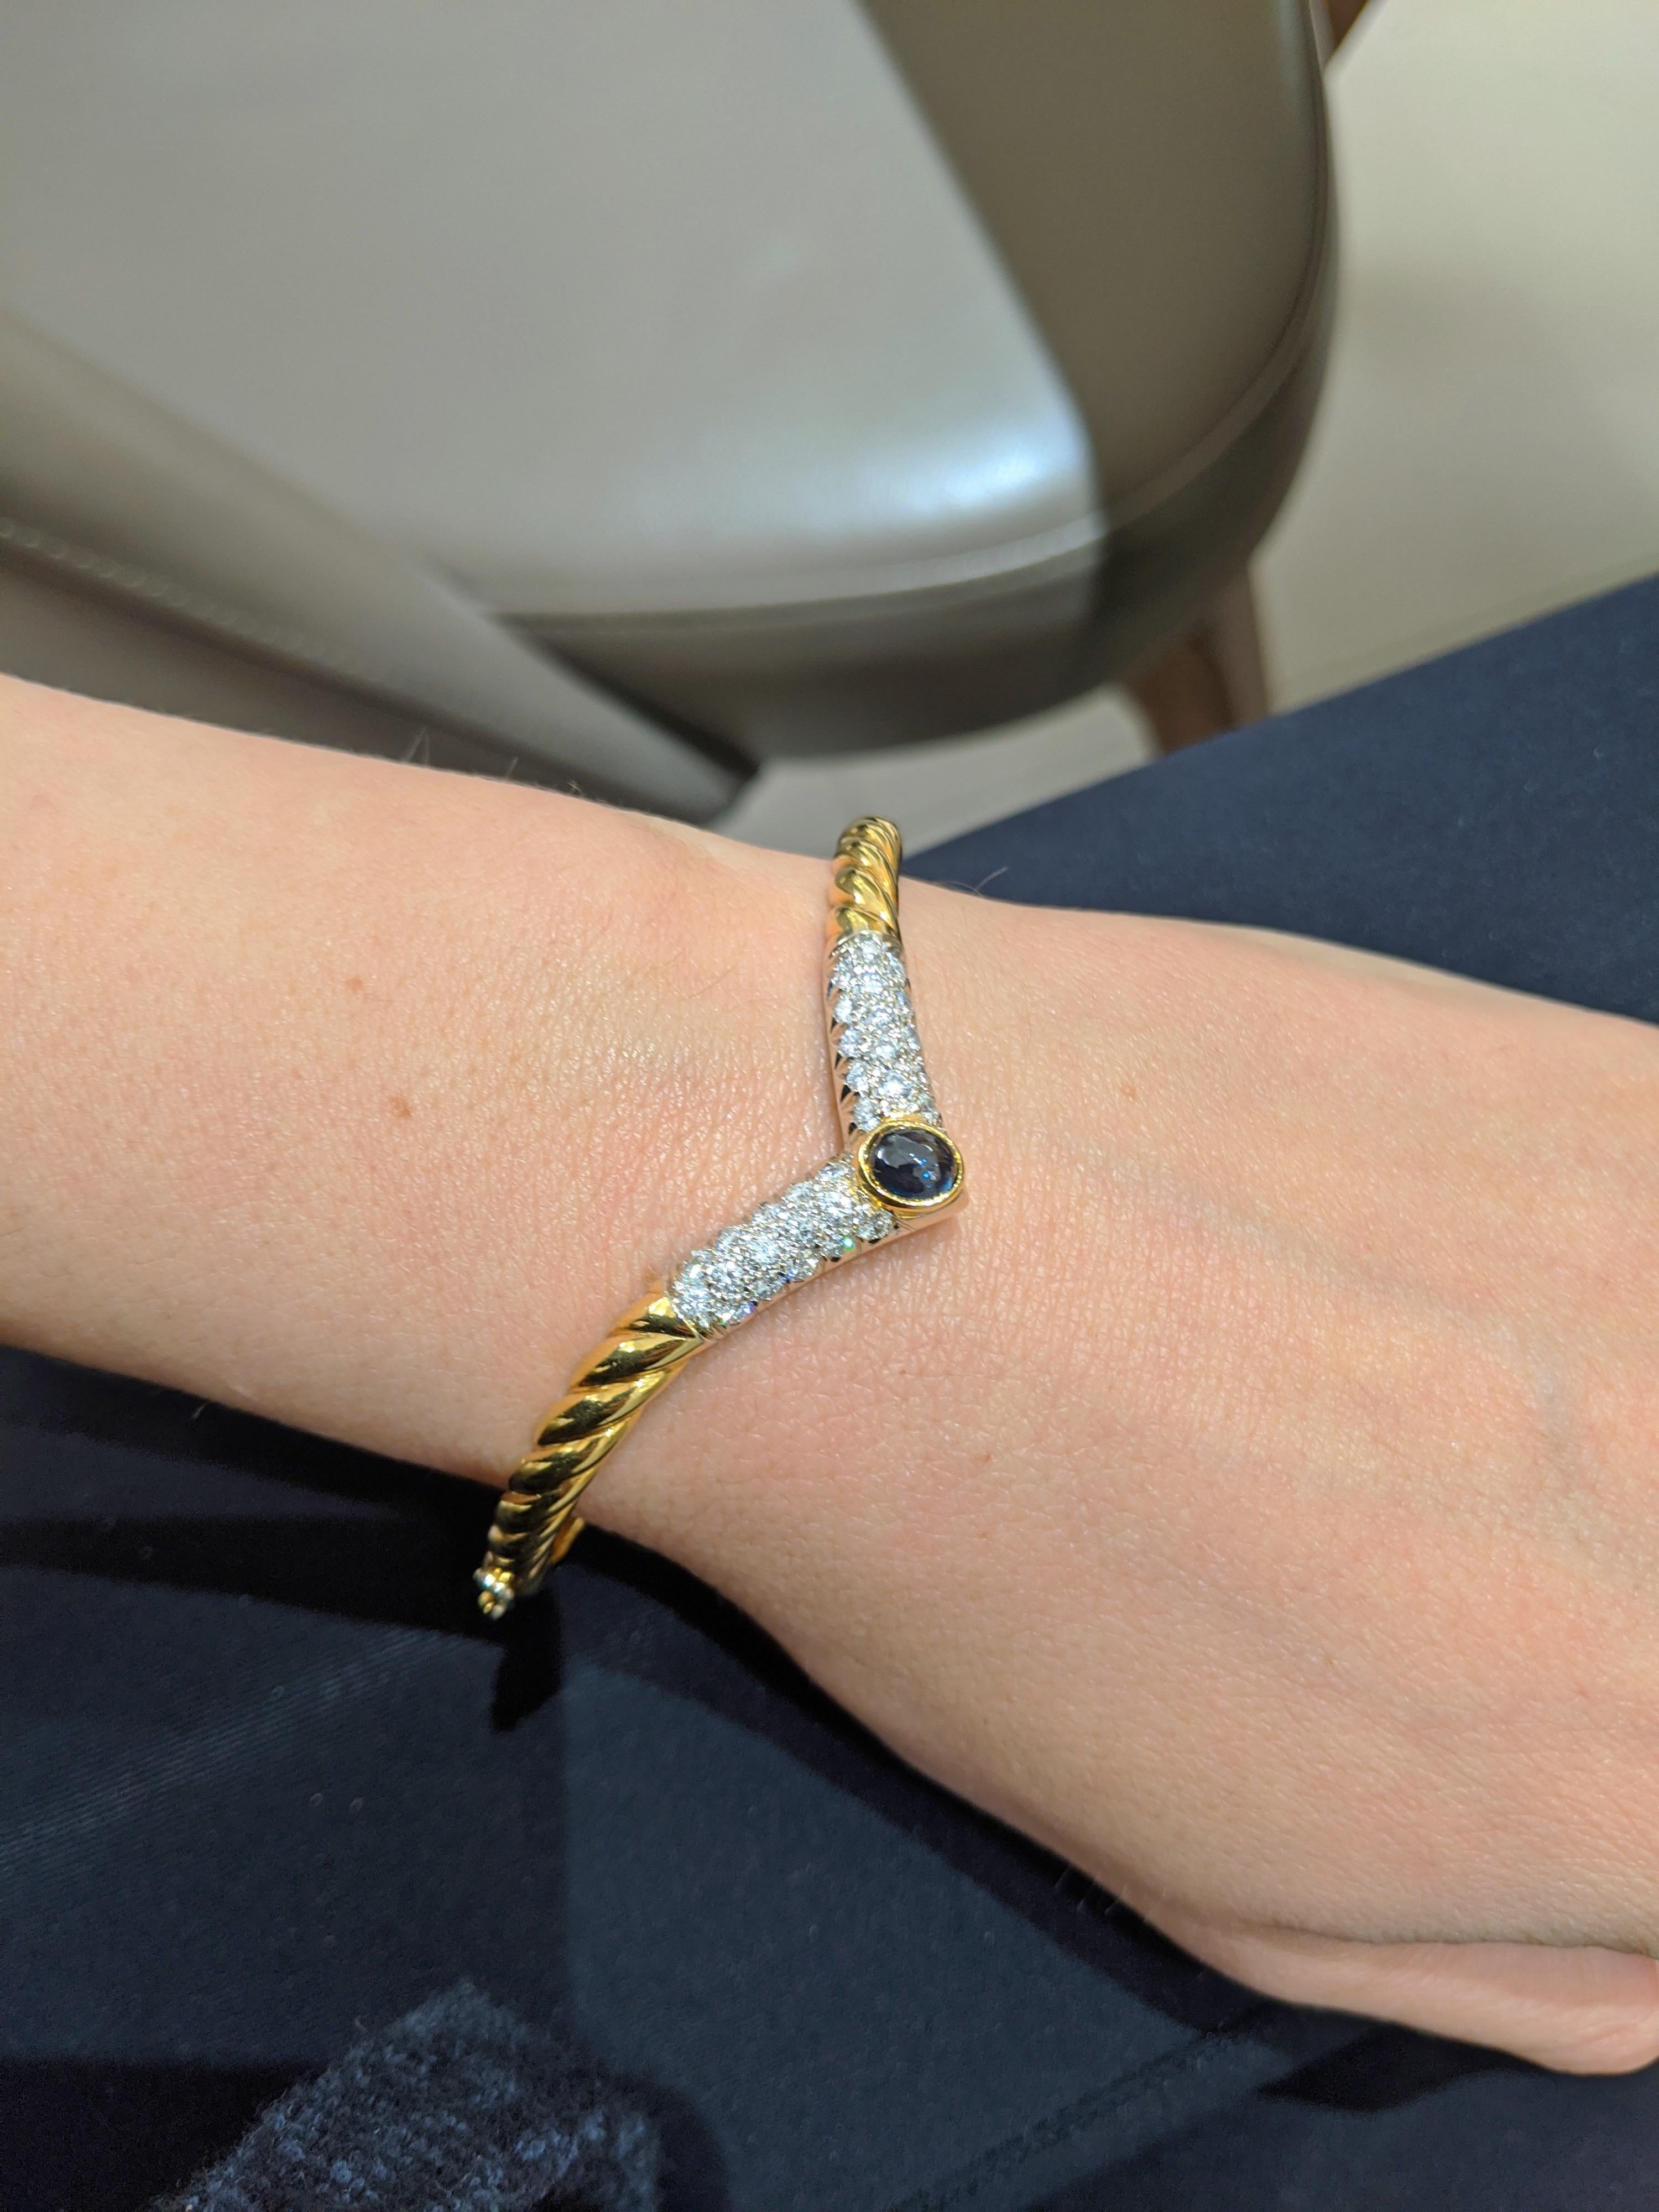 This is a beautiful 18 karat yellow gold bangle bracelet. The Vee shaped bracelet is set with pave diamonds and an oval cabochon blue sapphire. The bracelet measures 2 1/4